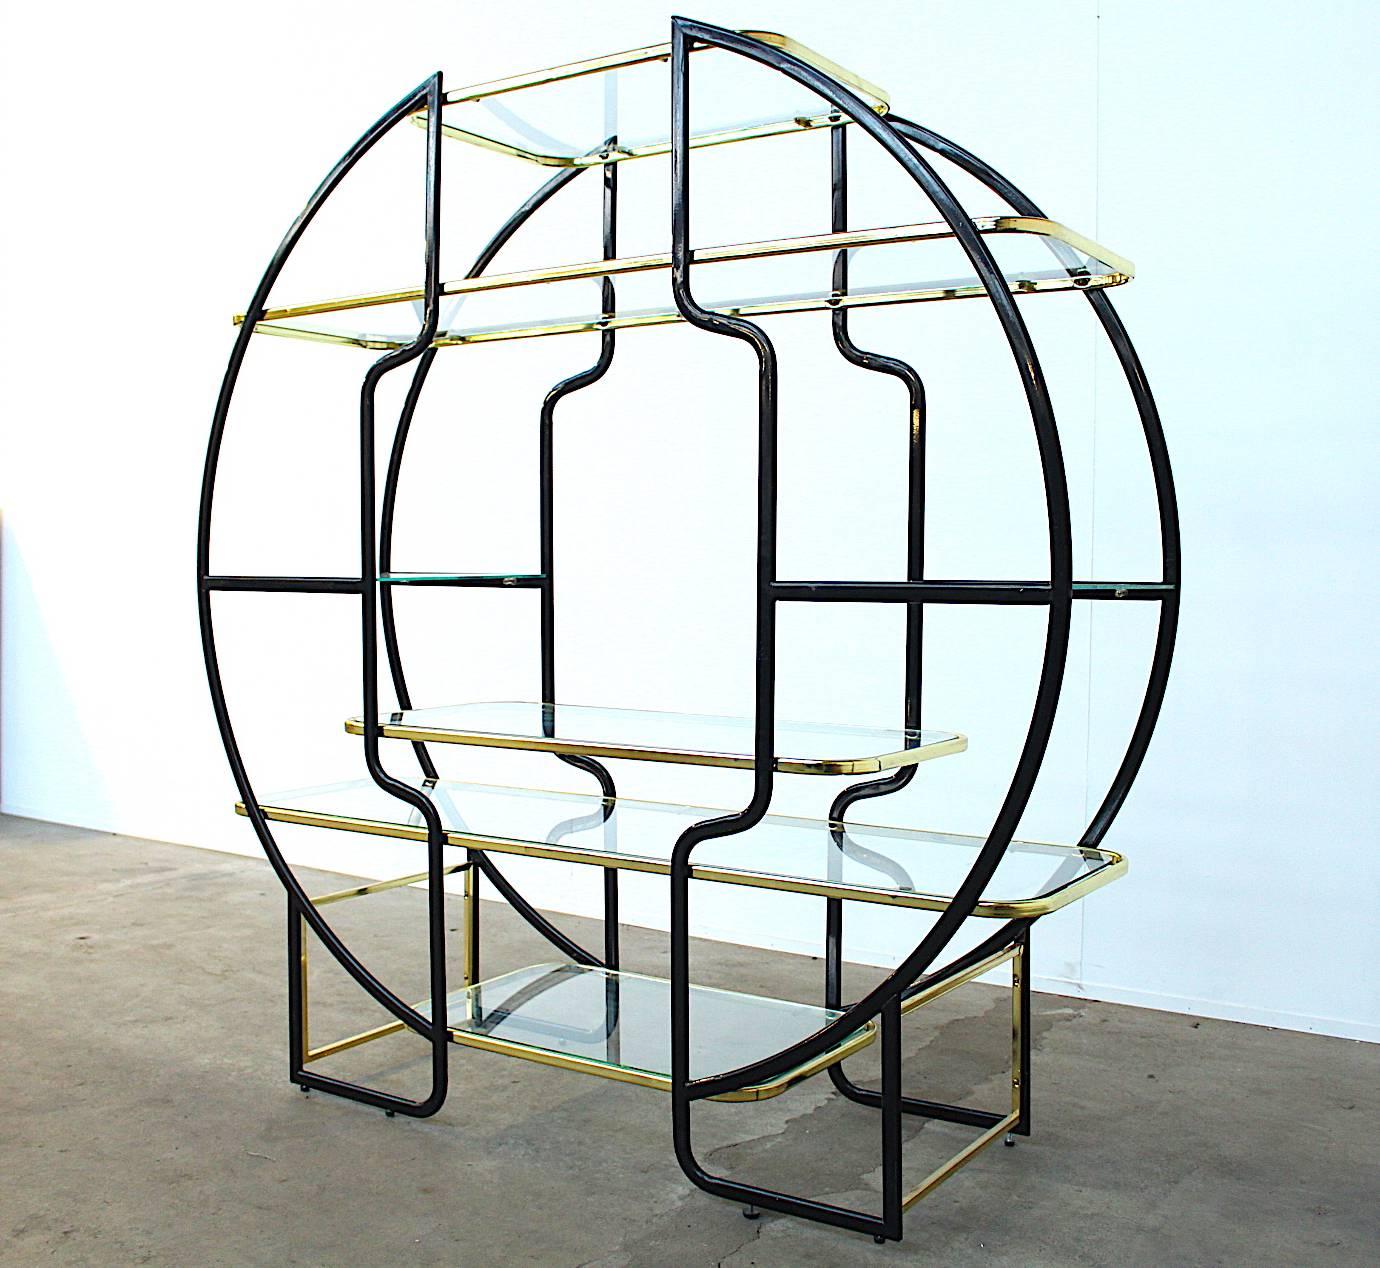 Beautiful Maison Jansen style round étagère or vitrine with seven tempered glass shelves in a frame of brass and black lacquered metal. Highly decorative and imposingly large piece; a very impressive eye catcher in any interior. The piece is fitted